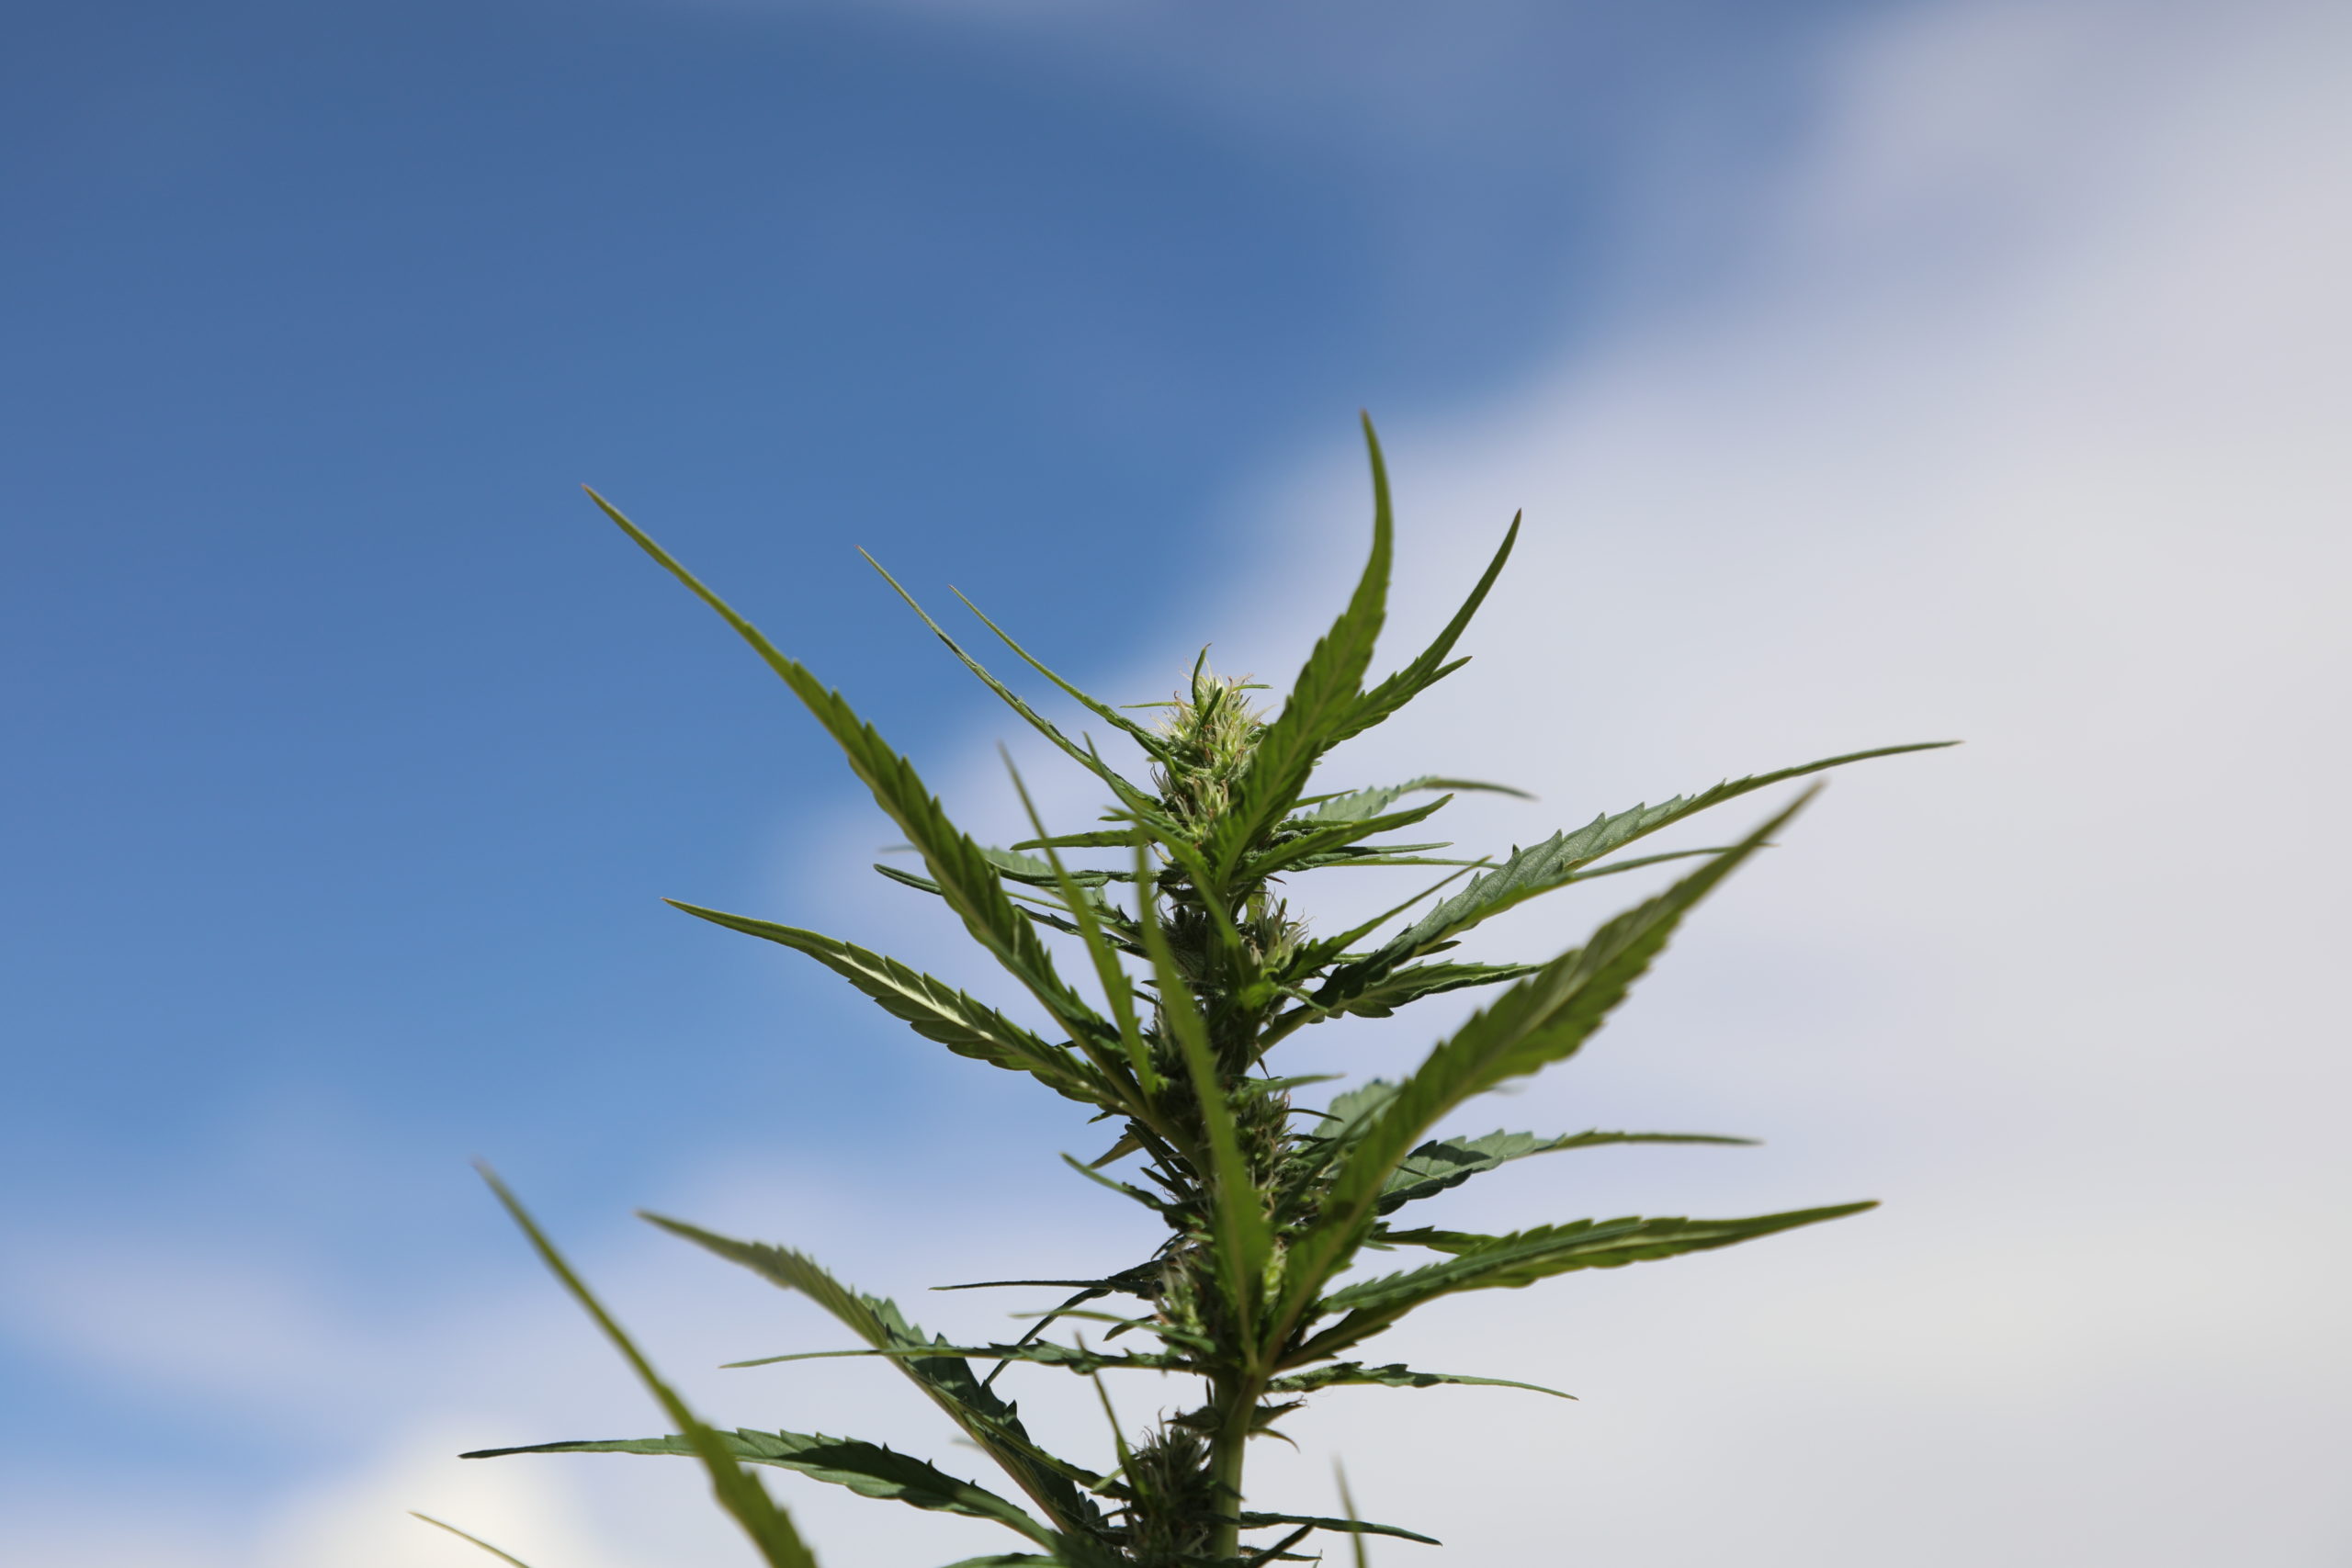 Best 4 reasons why Hemp Farming Is Good For the Planet